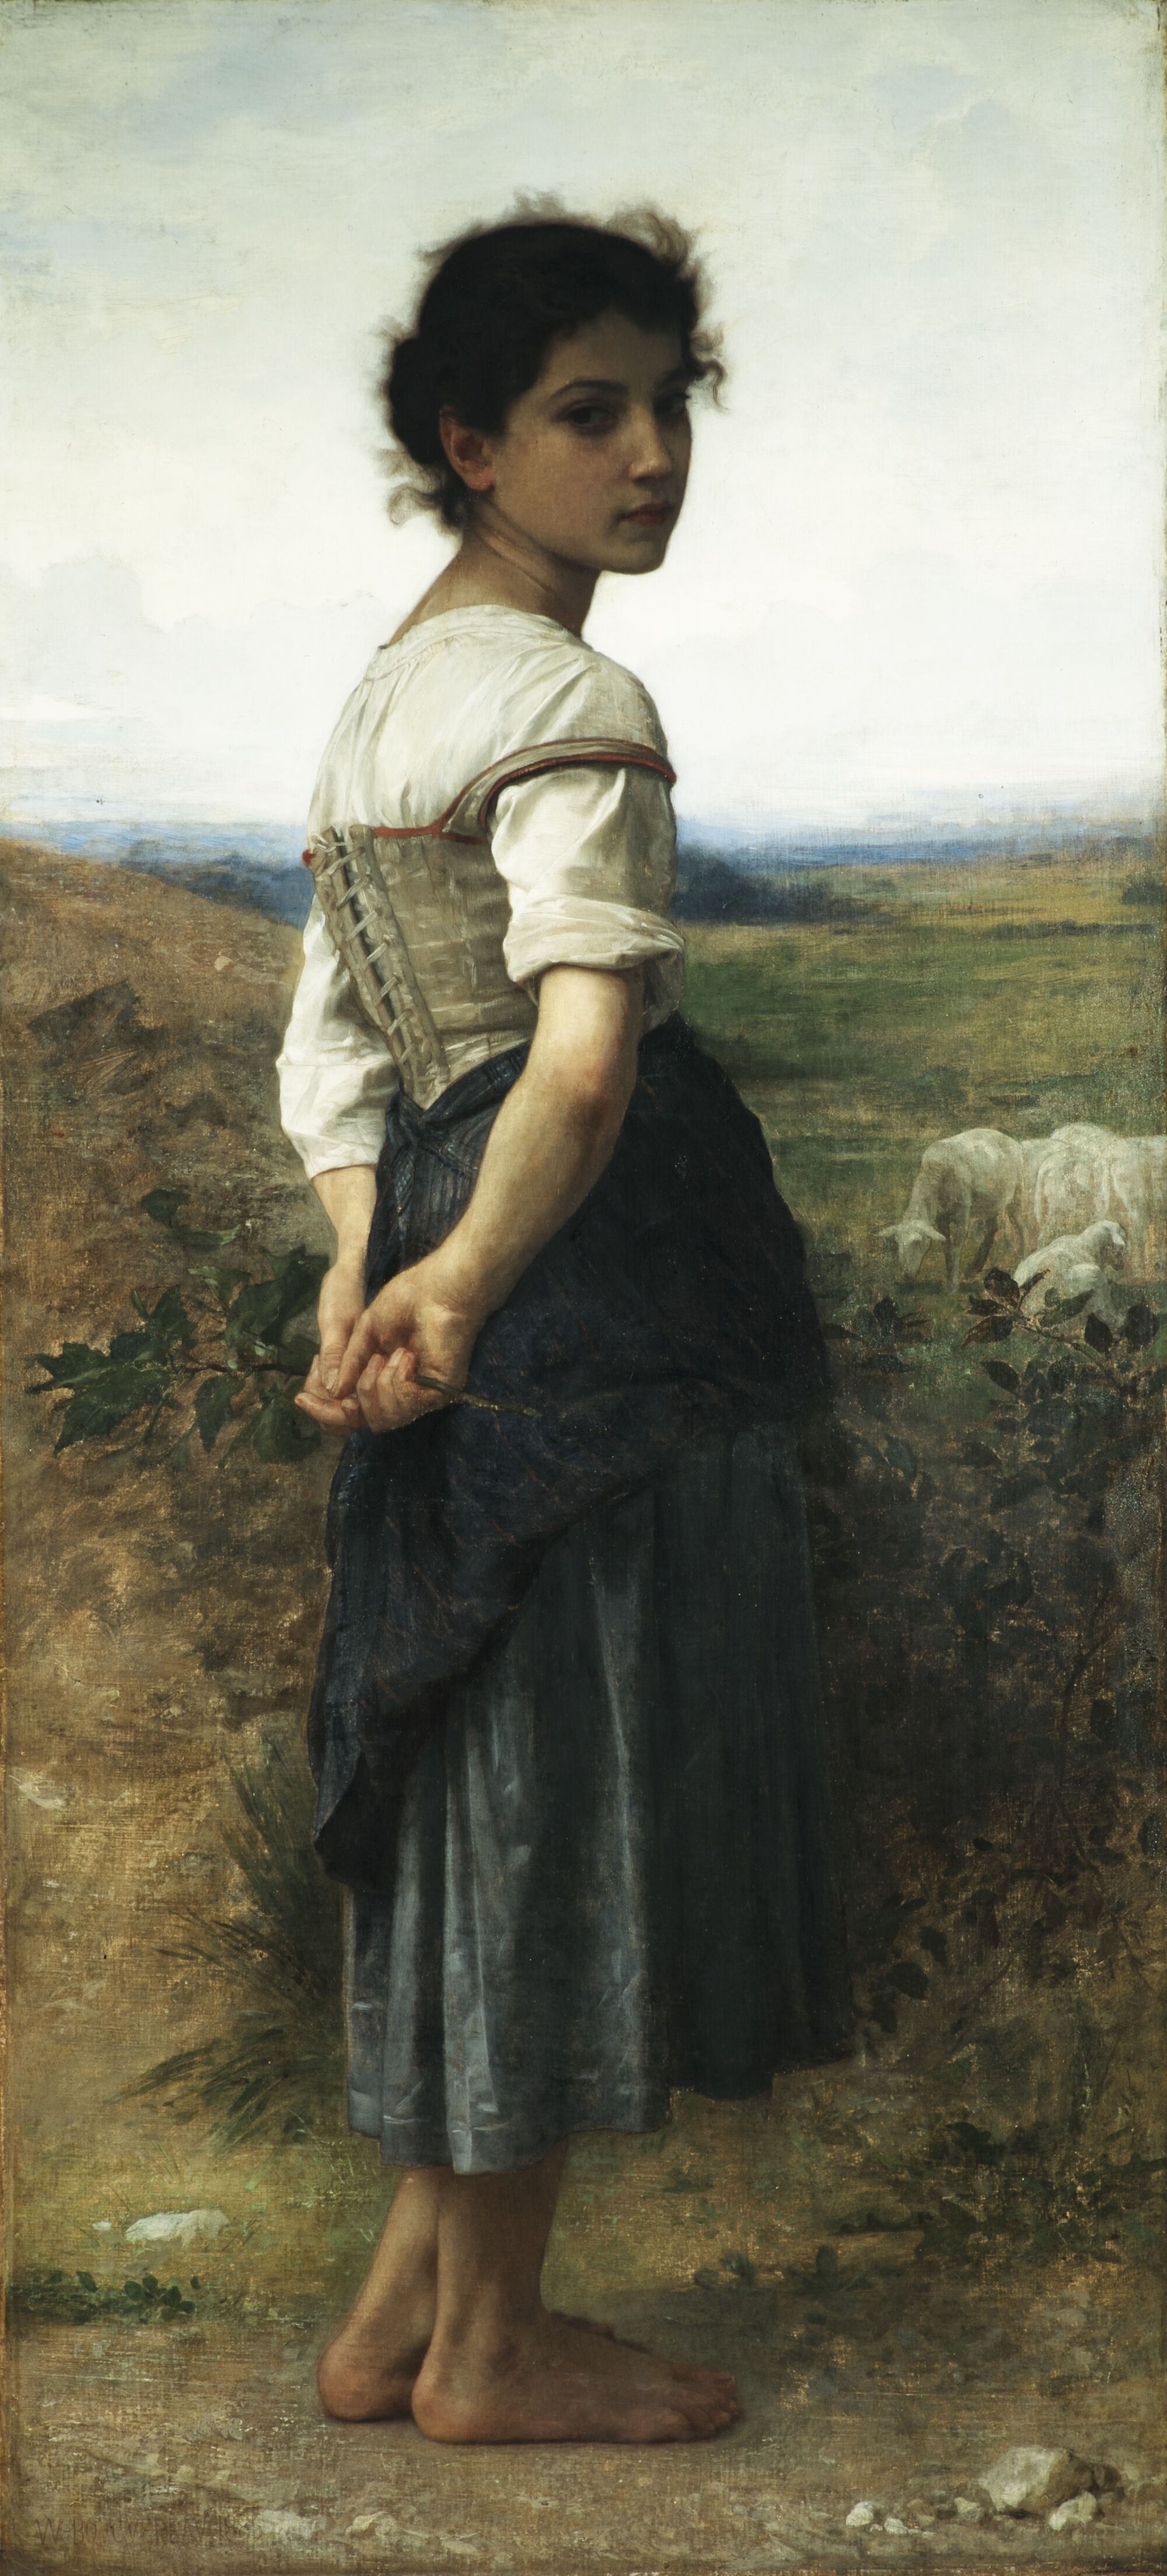 "Bouguereau & America" at the San Diego Museum of Art: "The Young Shepherdess" 1885. Oil on canvas